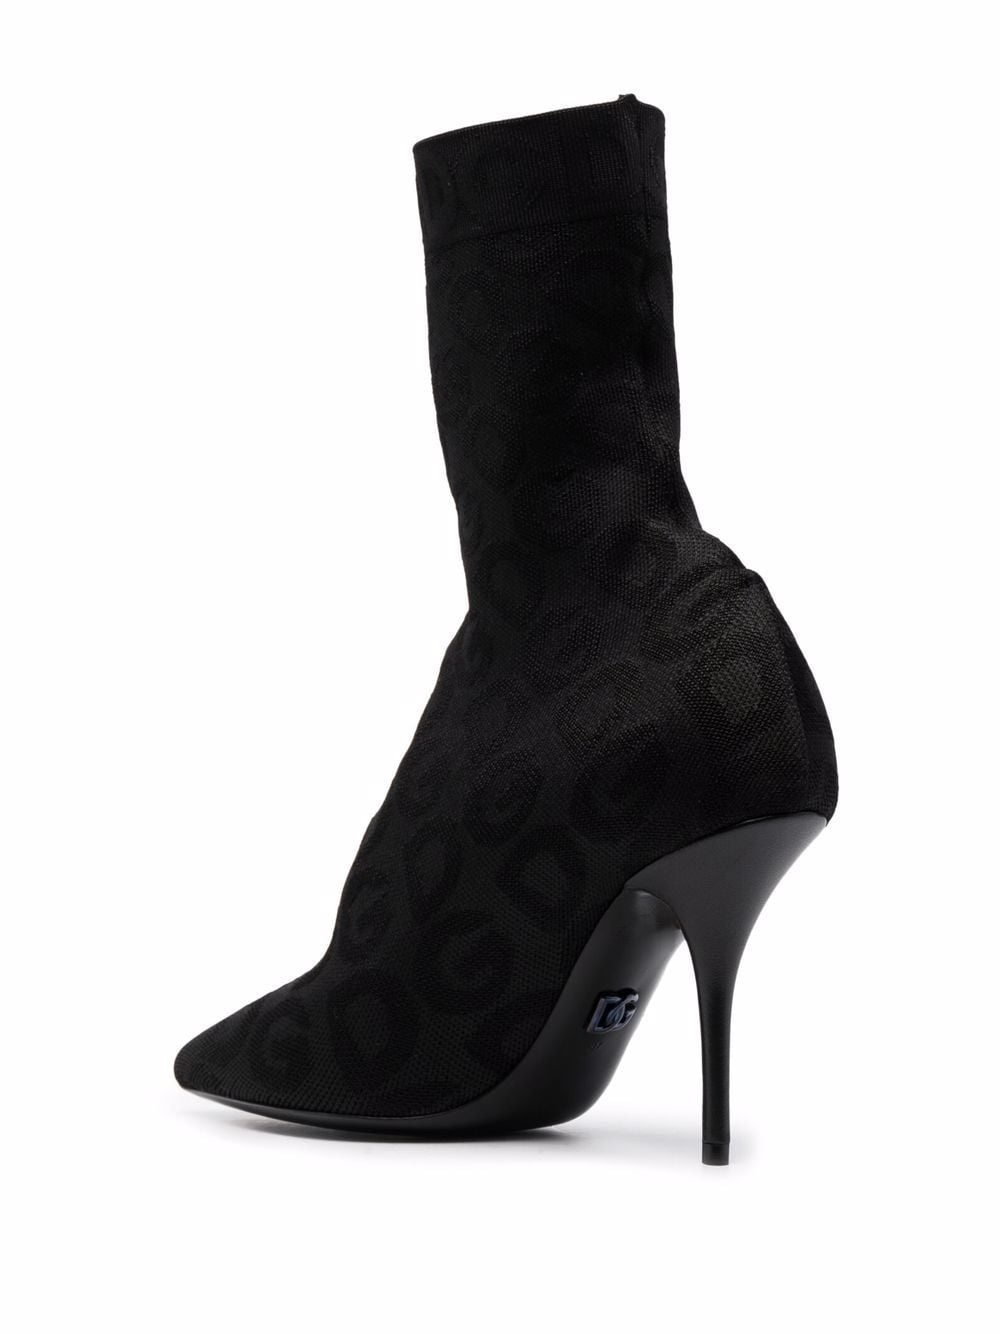 monogram ankle boots - 3